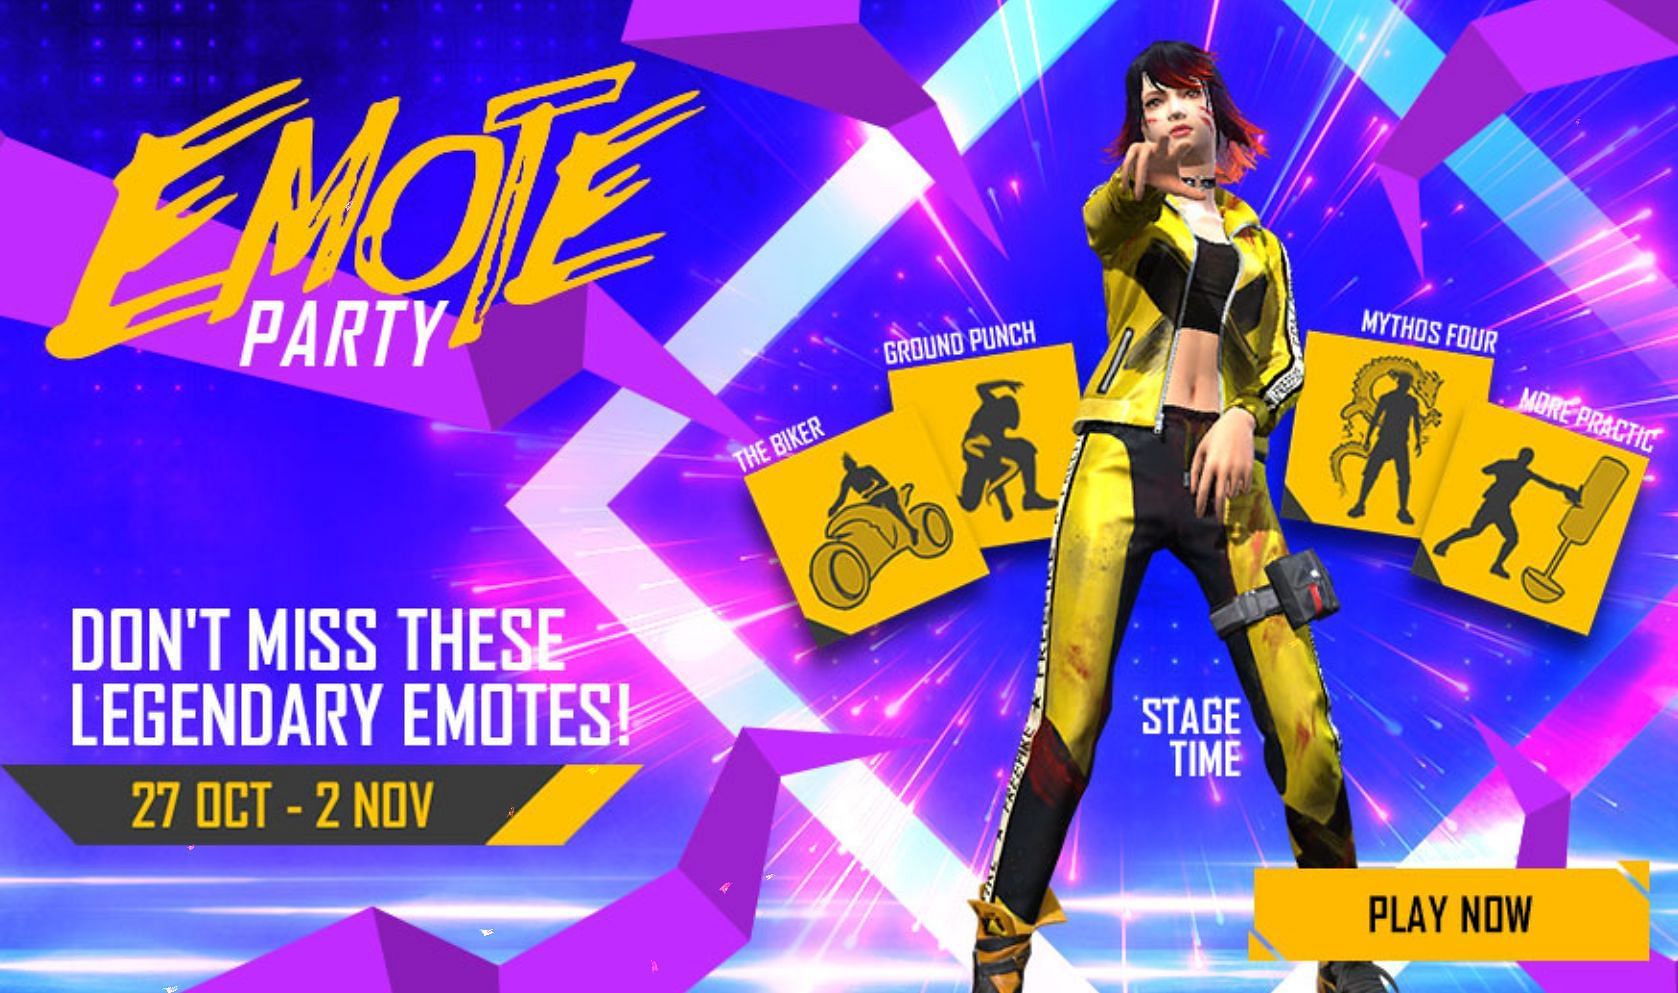 Legendary emotes are up for grabs (Image via Free Fire)